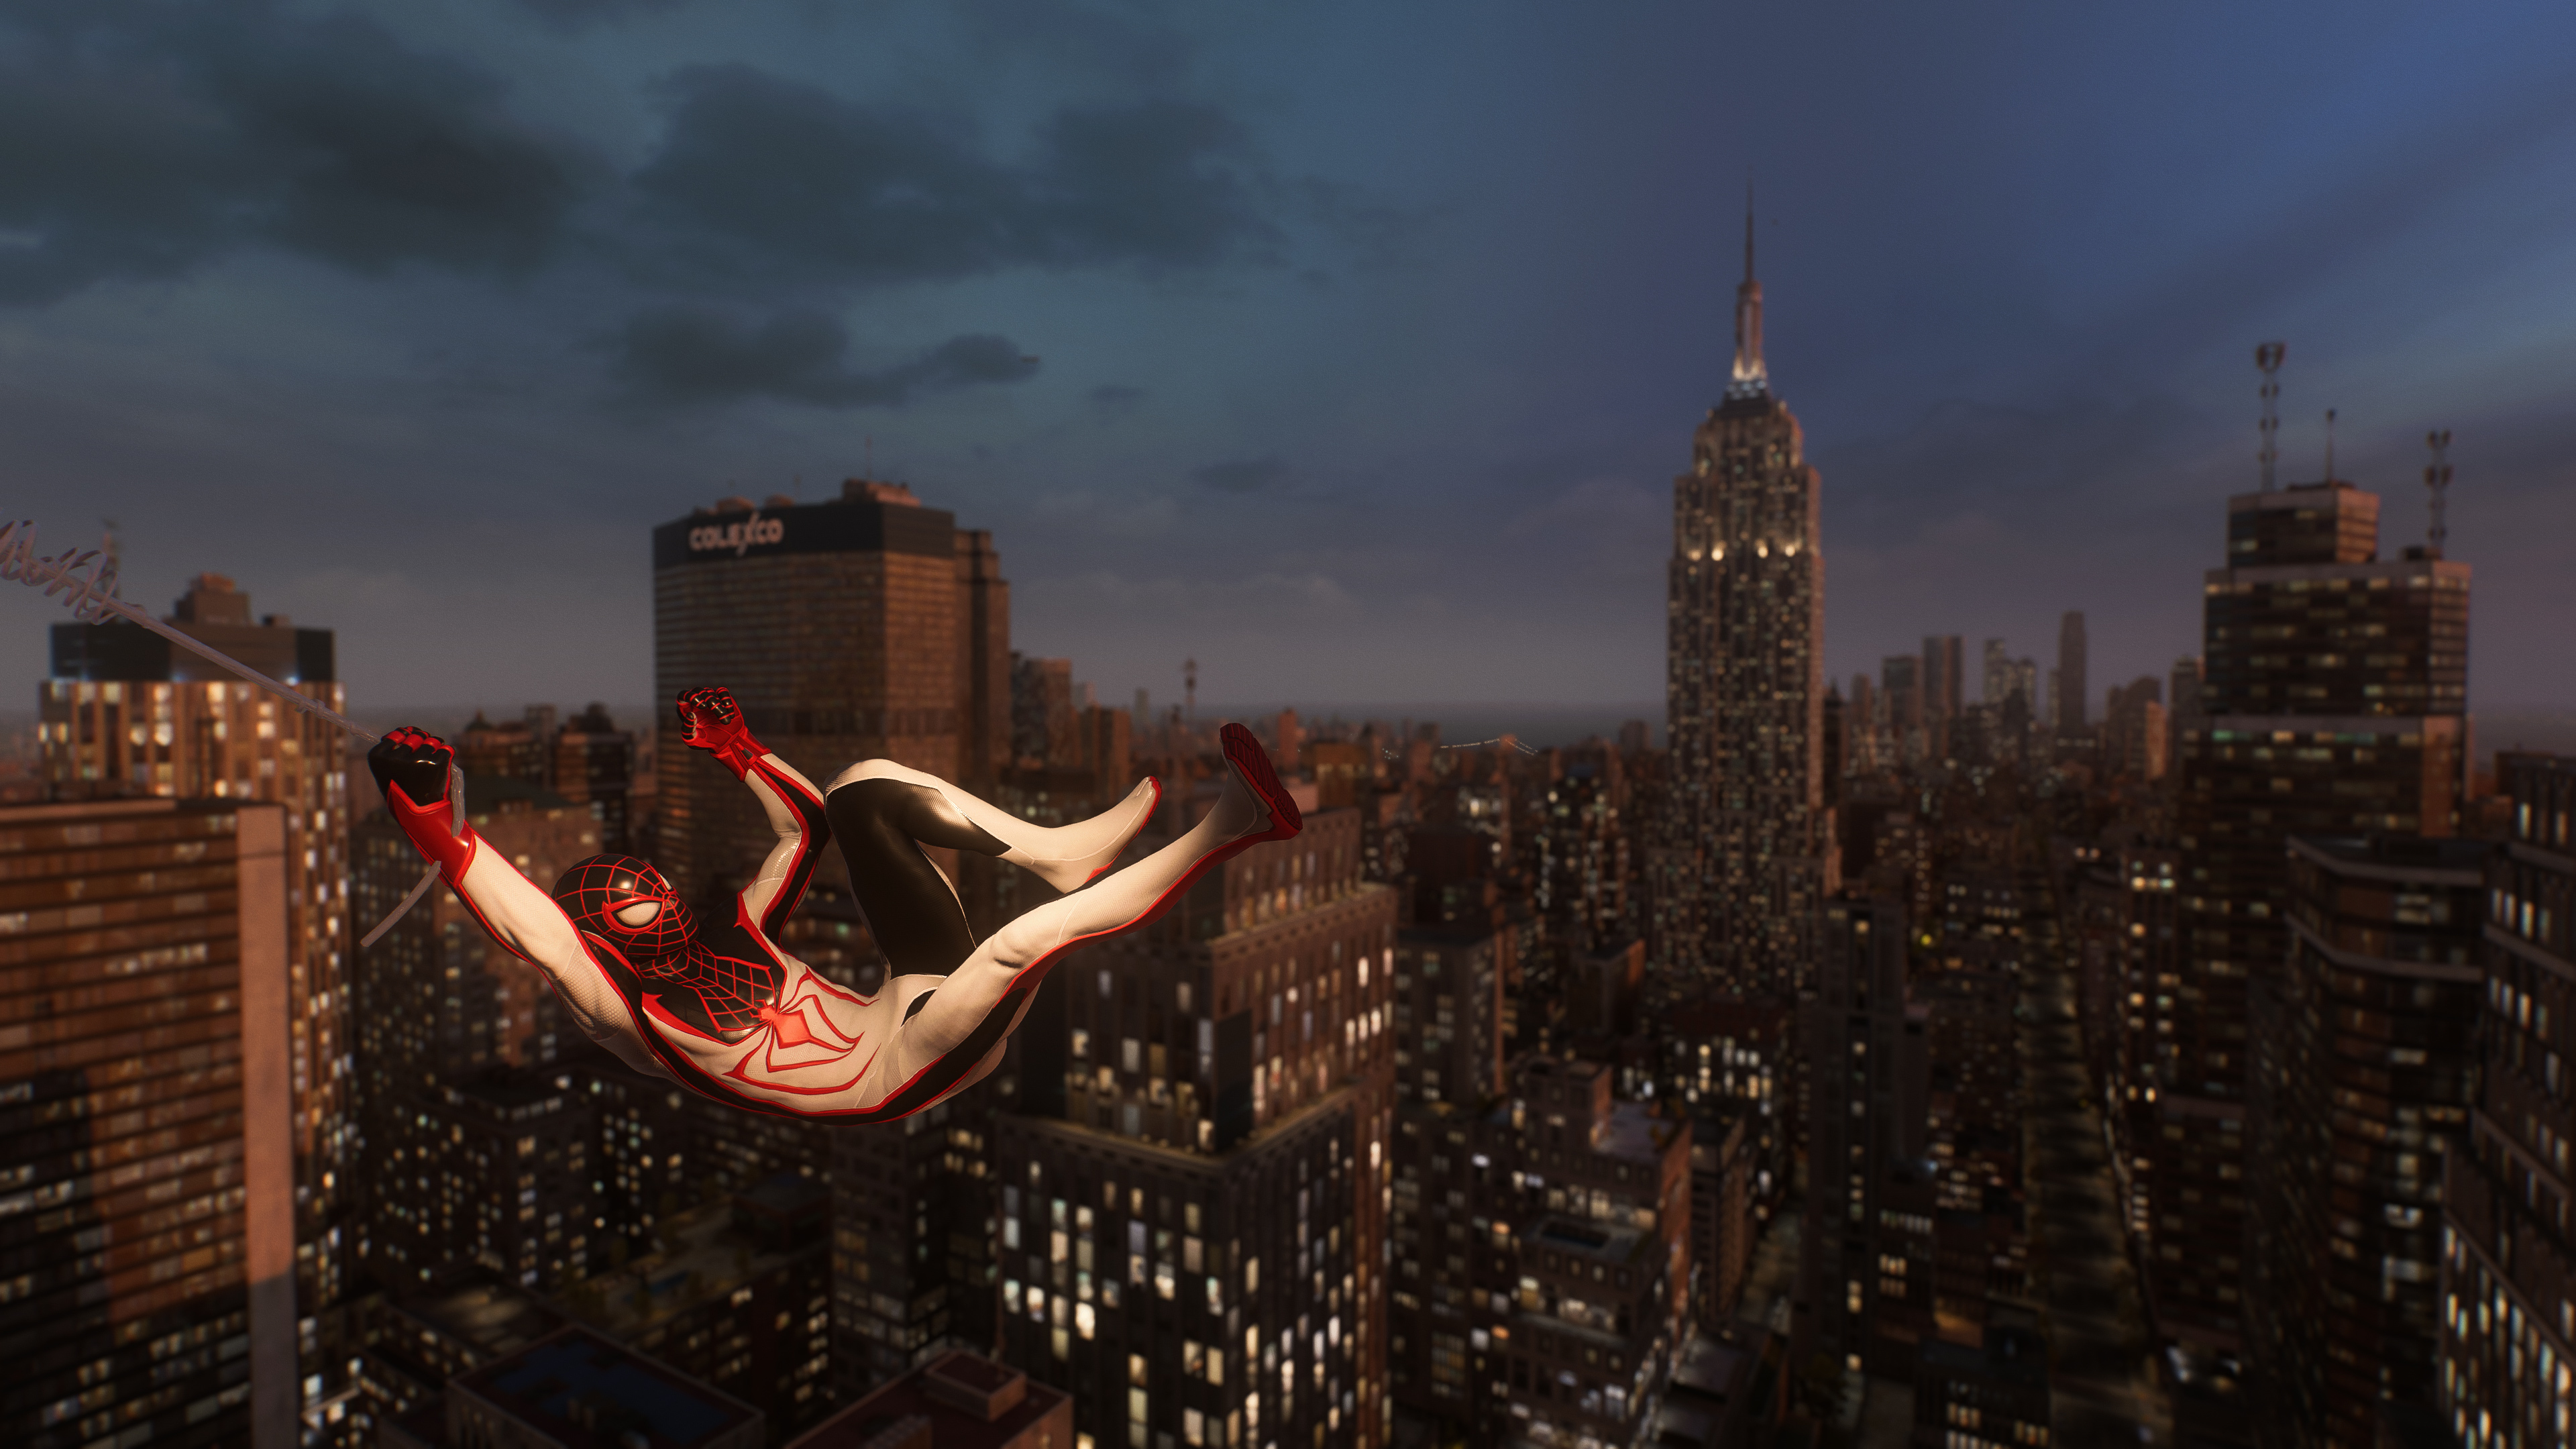 Miles Morales swings above Midtown Manhattan in Marvel’s Spider-Man 2 at dusk, while wearing the T.R.A.C.K. suit